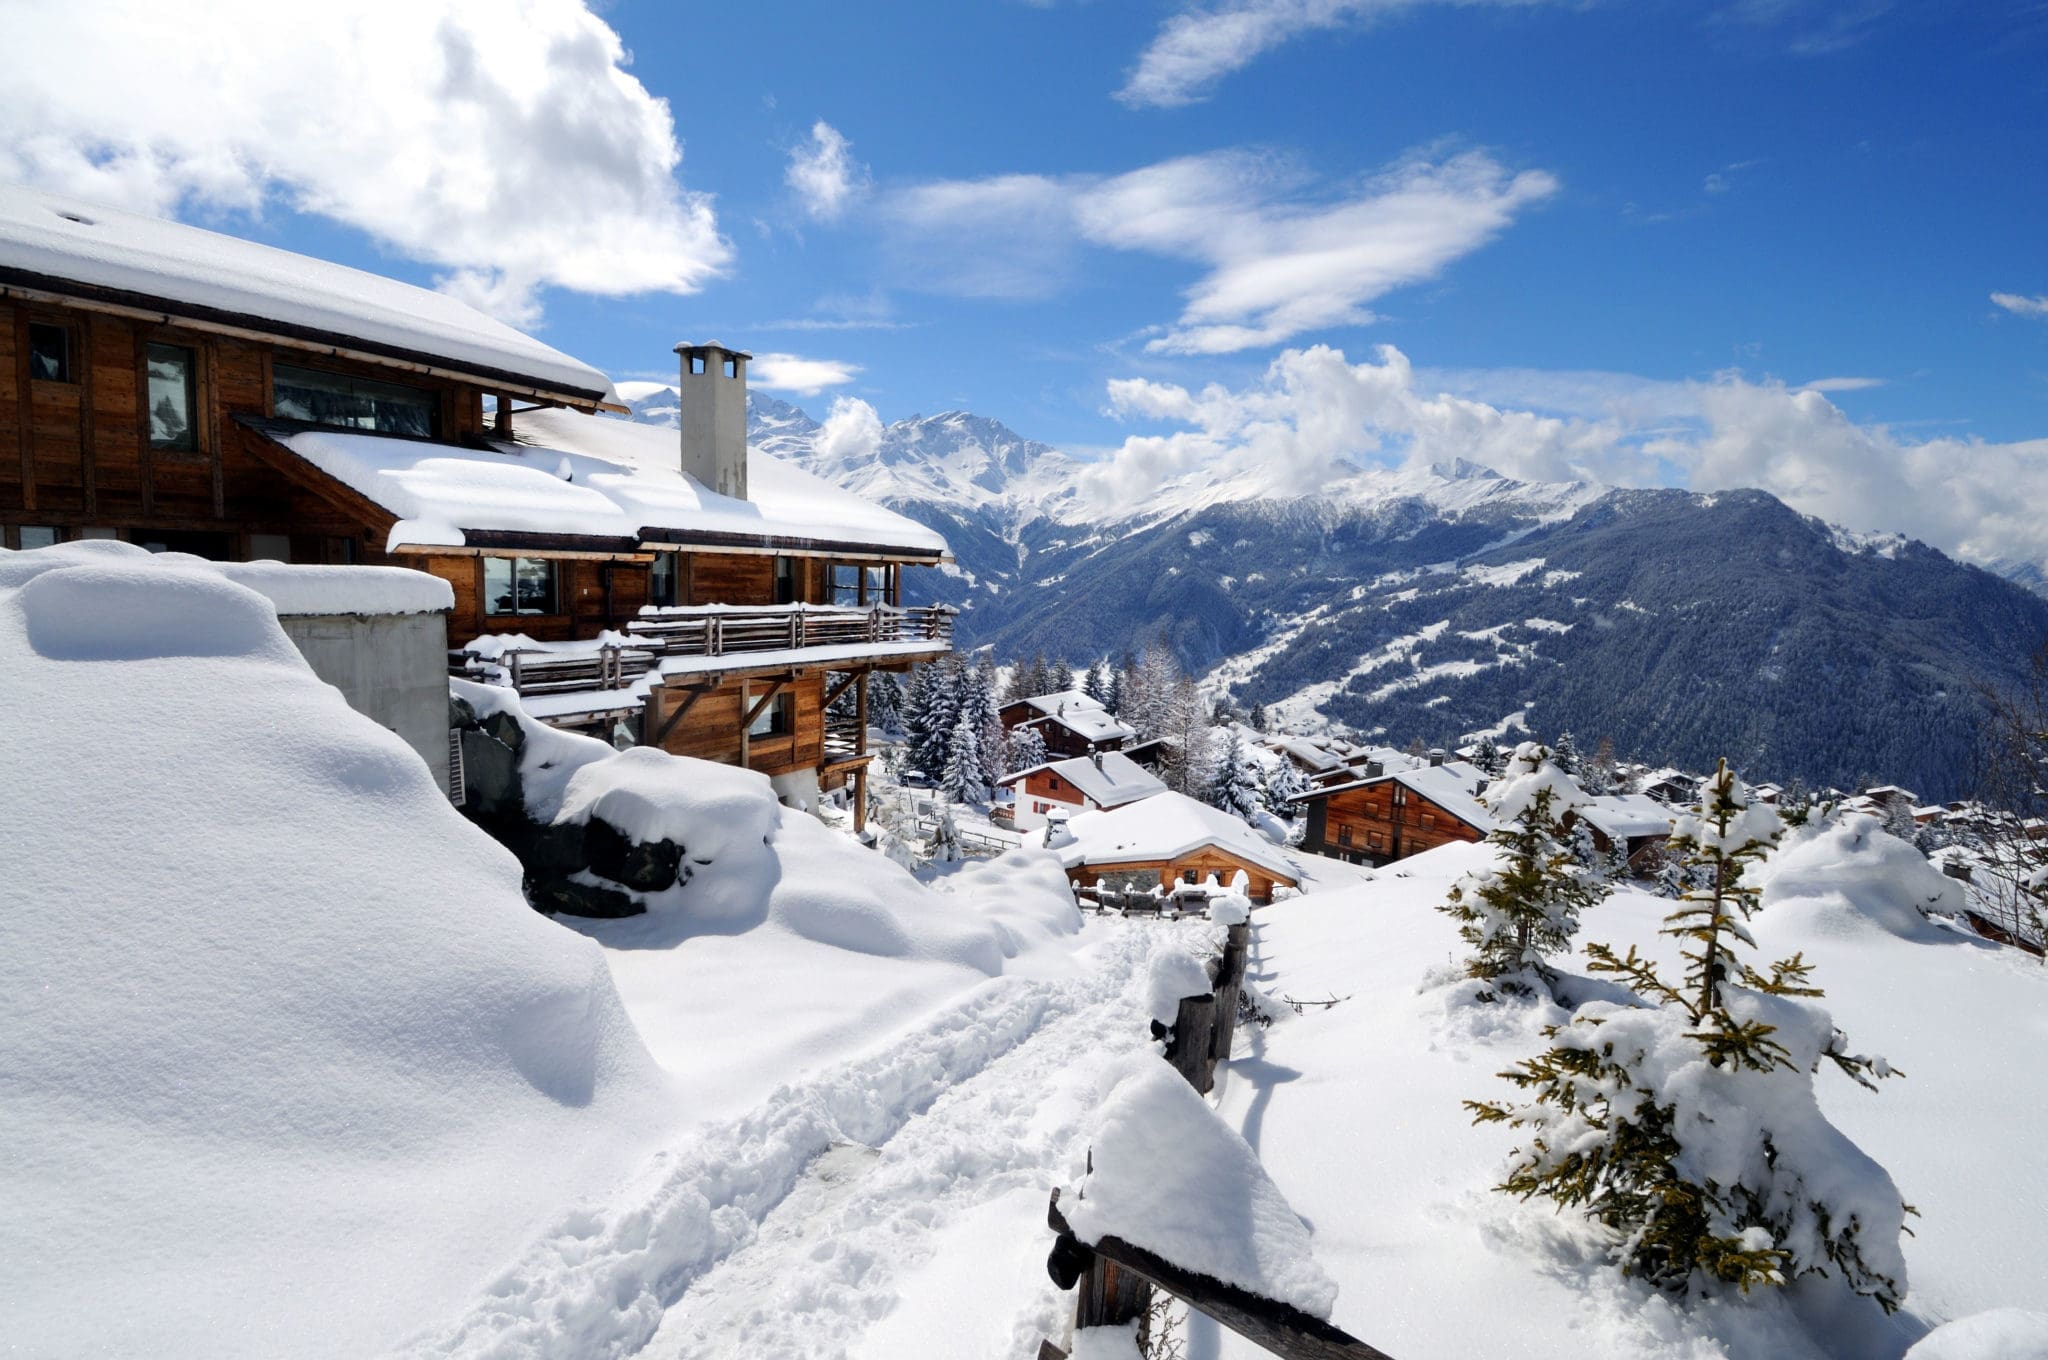 What’s new in Verbier this winter?